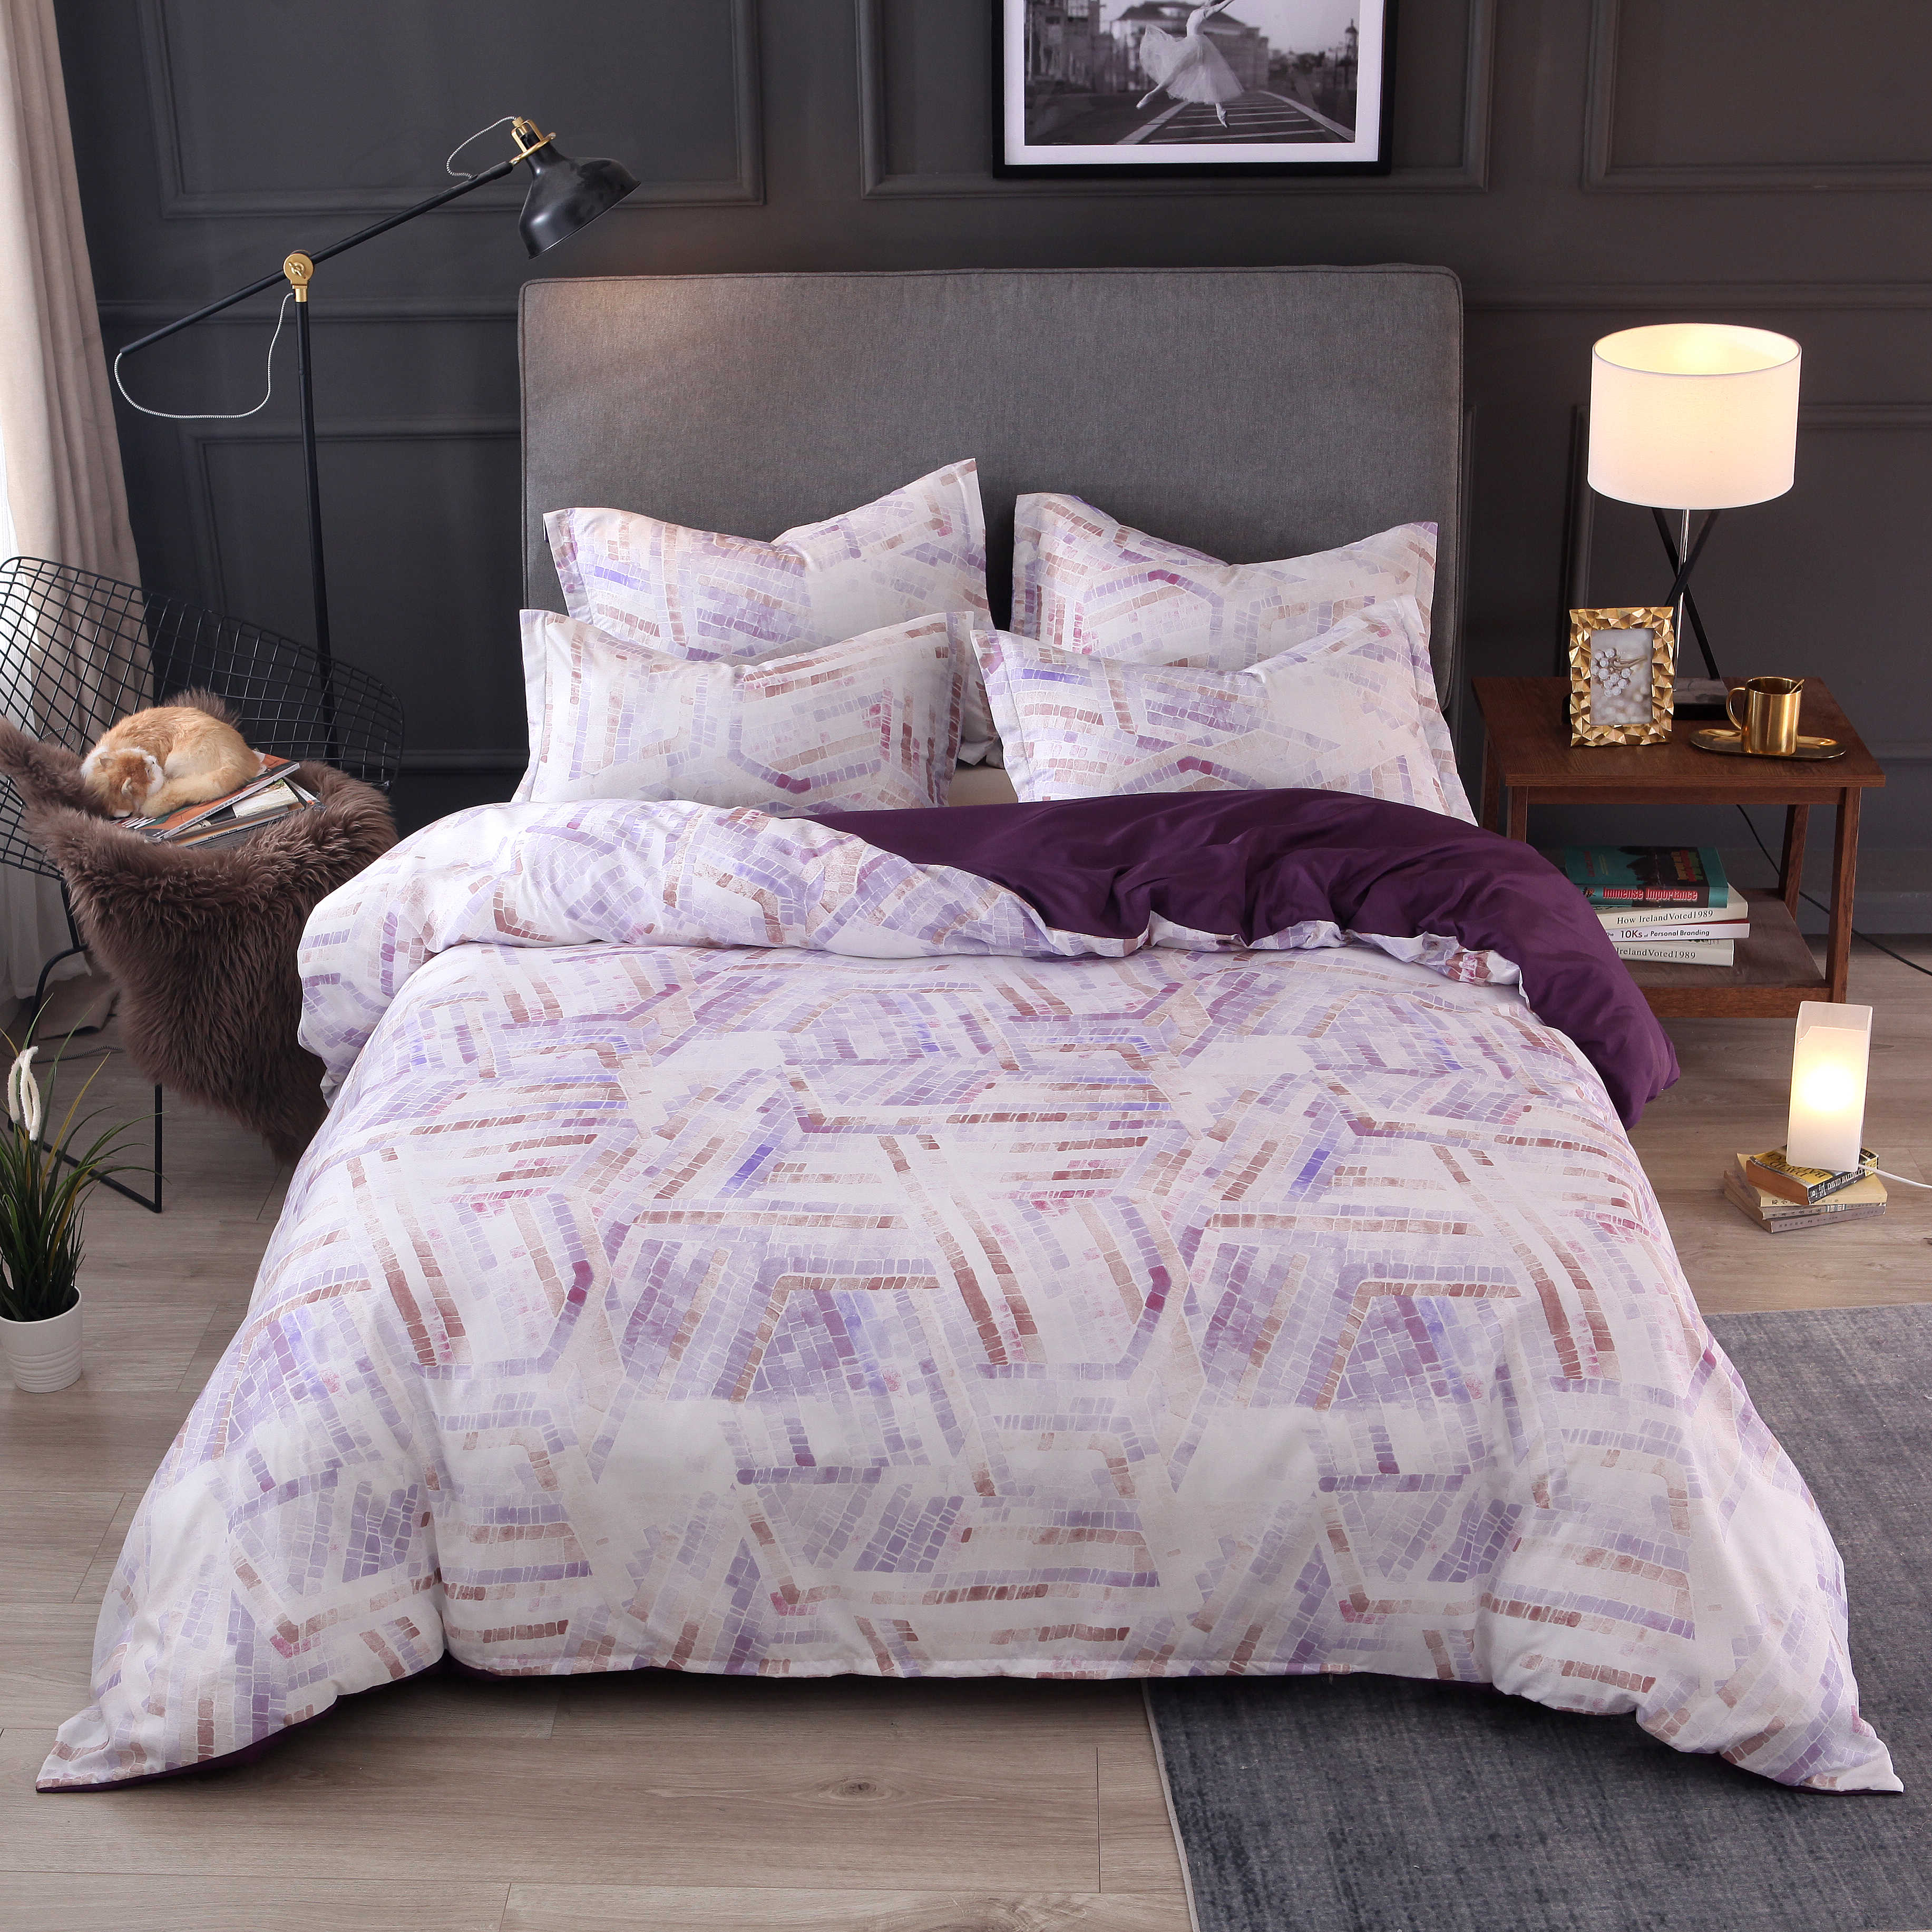 

3 PCS Bedding Sets Simple Style Printed Quilt Cover Pillowcase For Queen Size